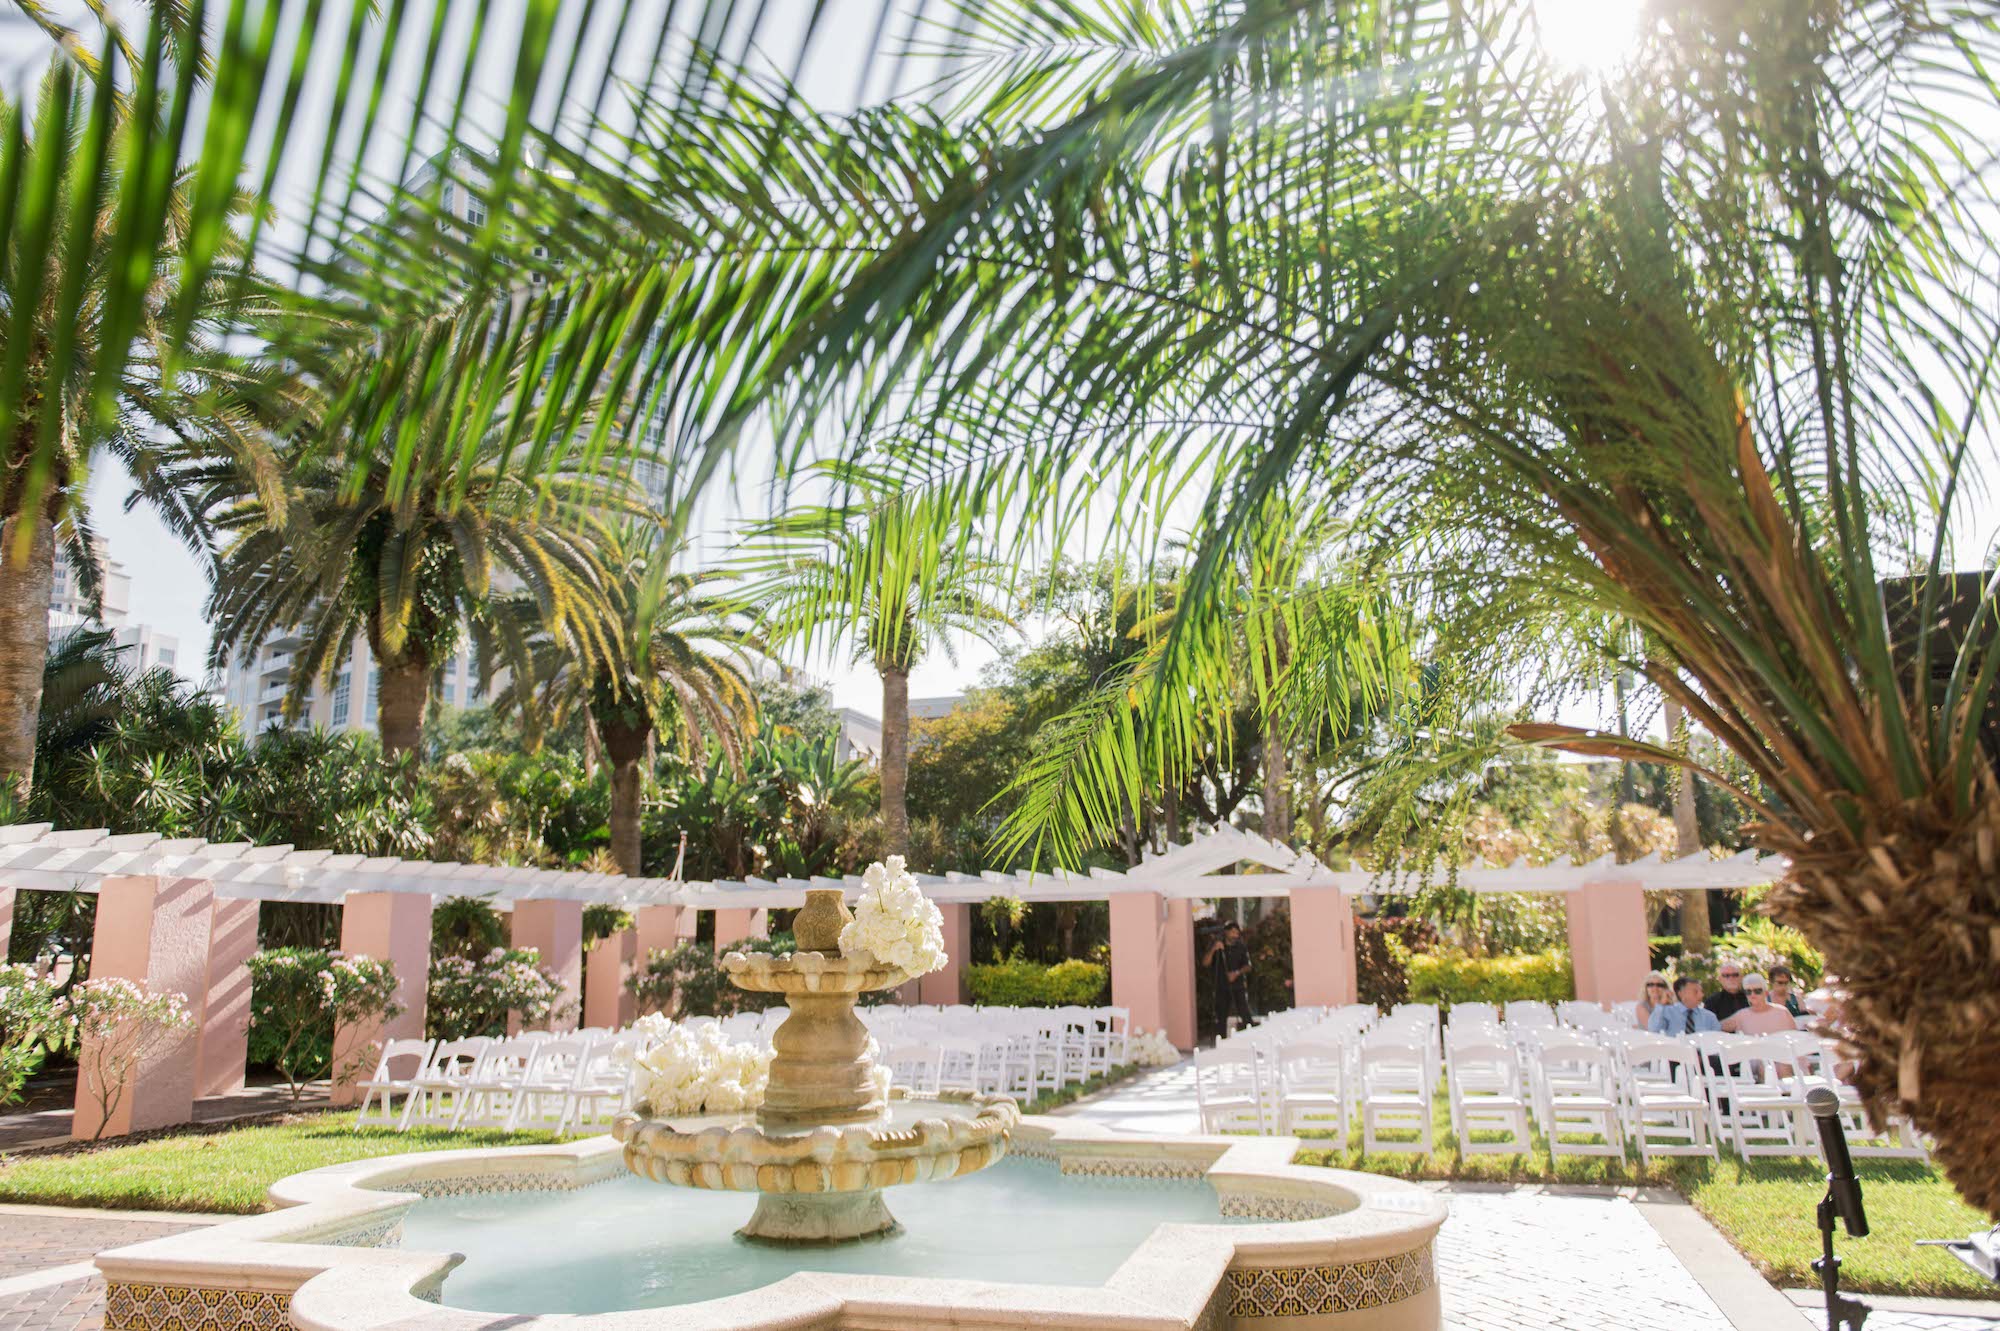 Timeless and Classic Courtyard Wedding Ceremony | St. Pete Wedding Venue The Vinoy Renaissance